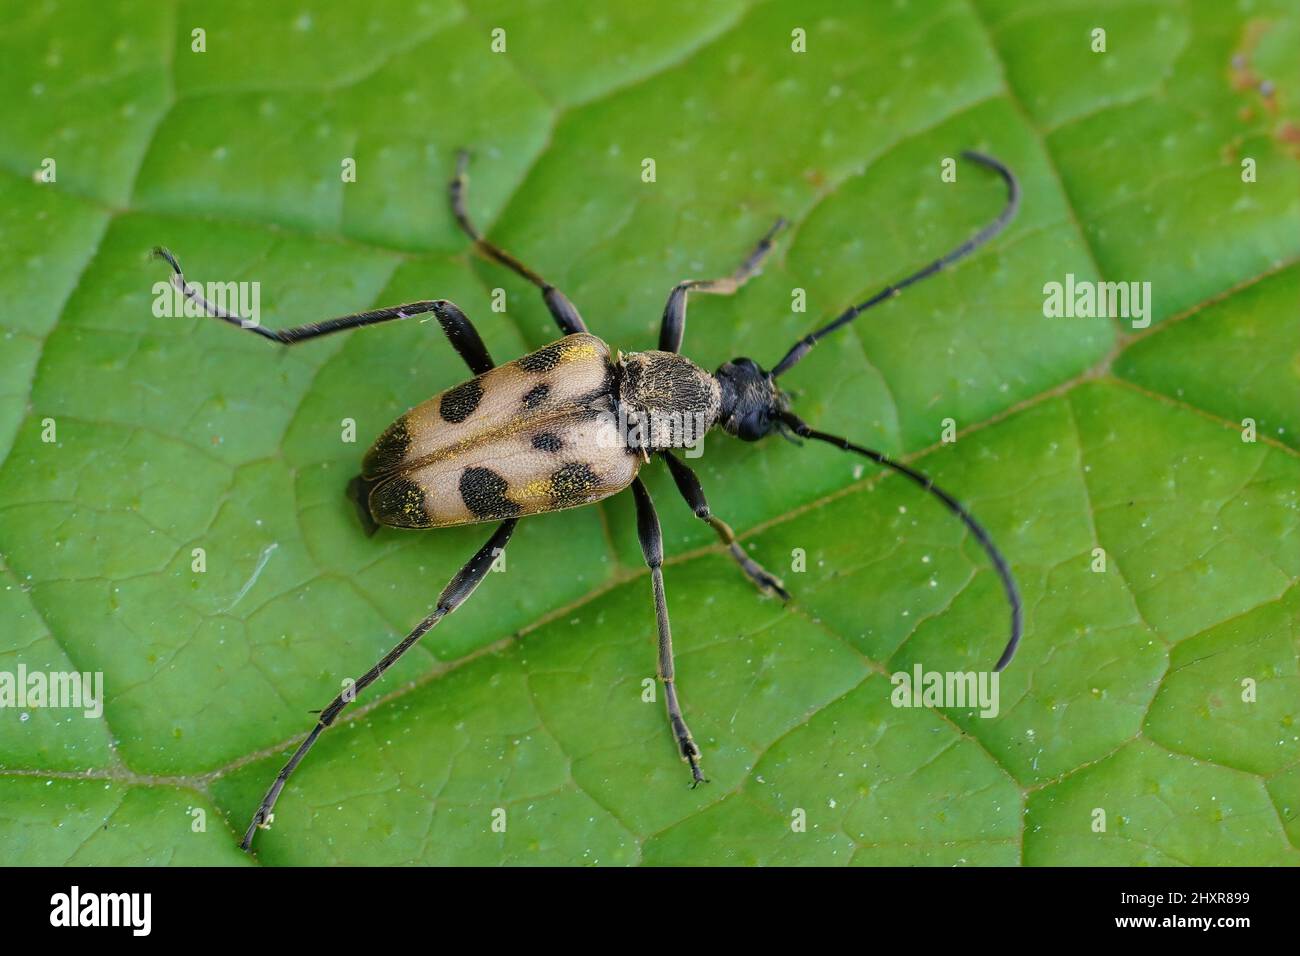 Closeup on a flower longhorn beetle, Pacin the gardenhytodes cerambyciformis, sitting on a green leaf Stock Photo